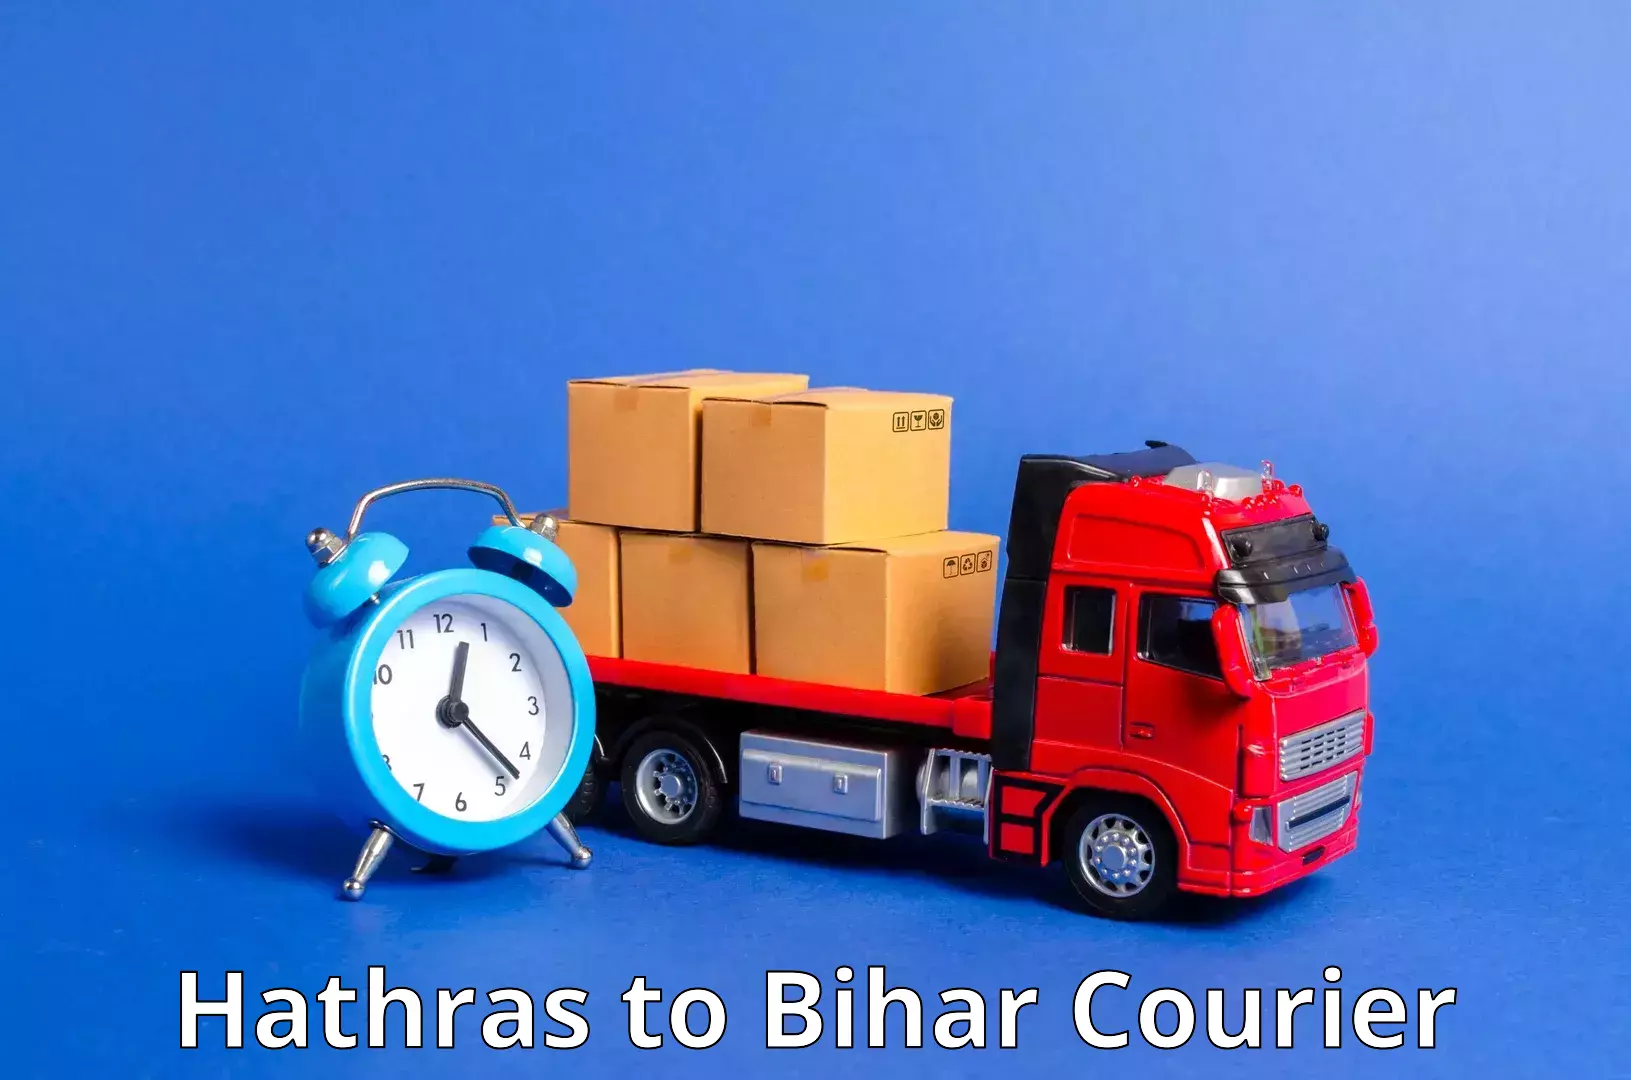 Domestic courier Hathras to Nawada